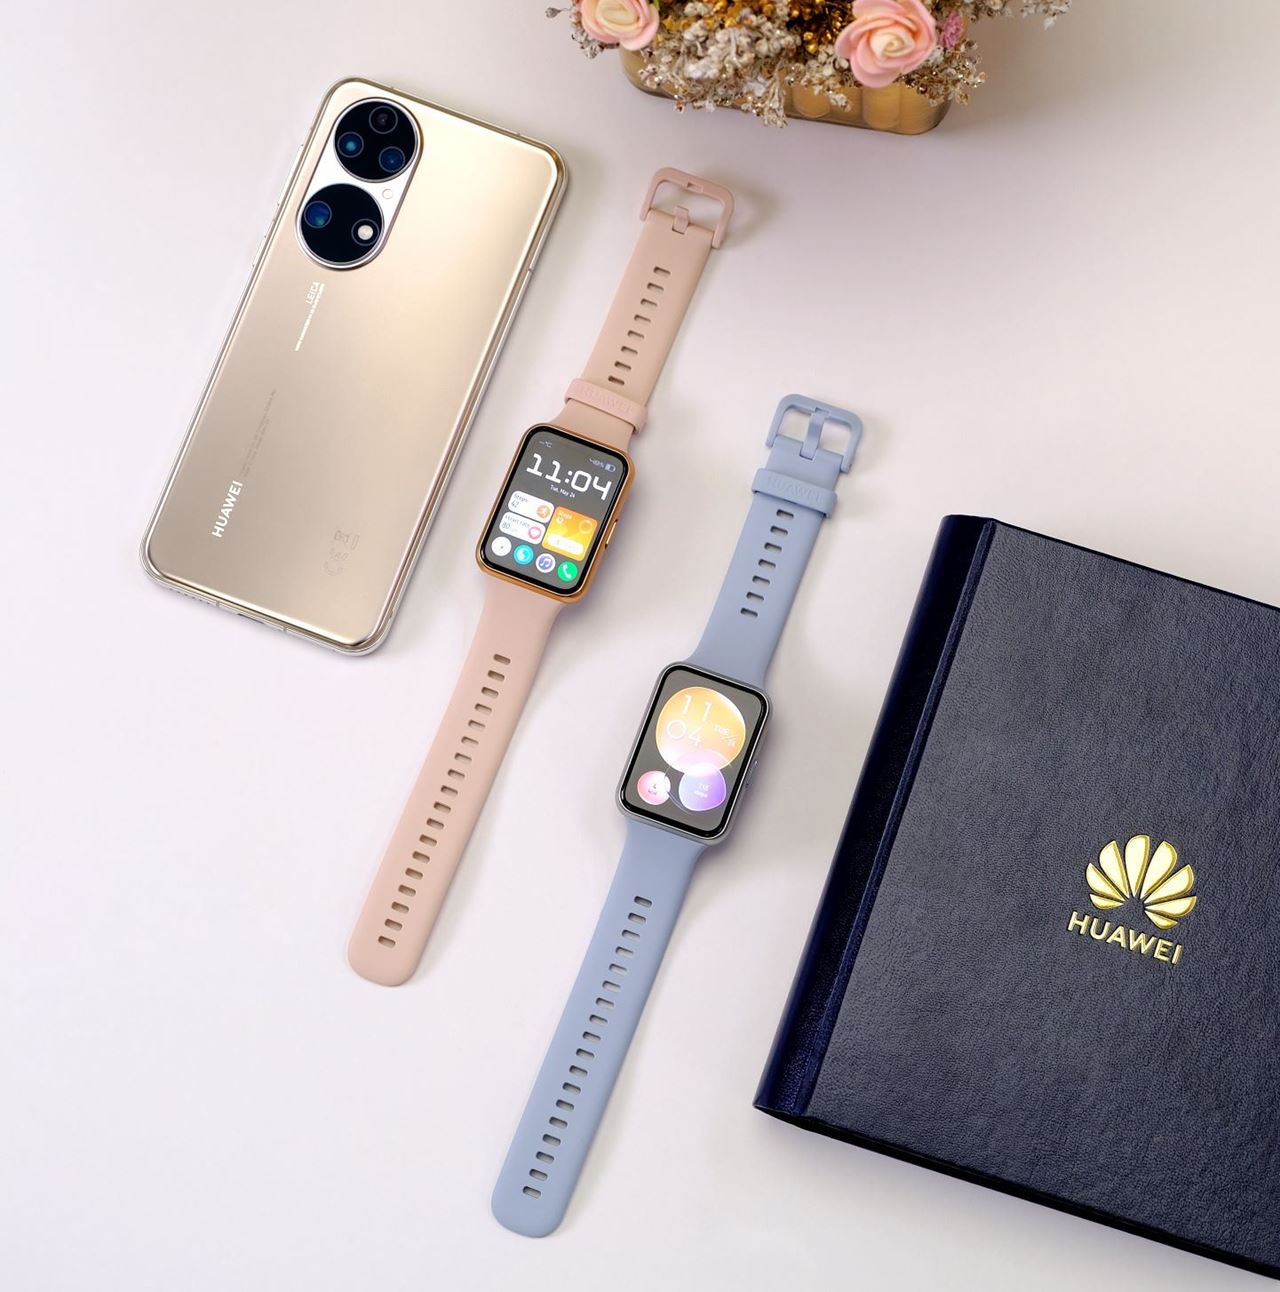 The new HUAWEI WATCH FIT 2 blends tech with fashion and here is how